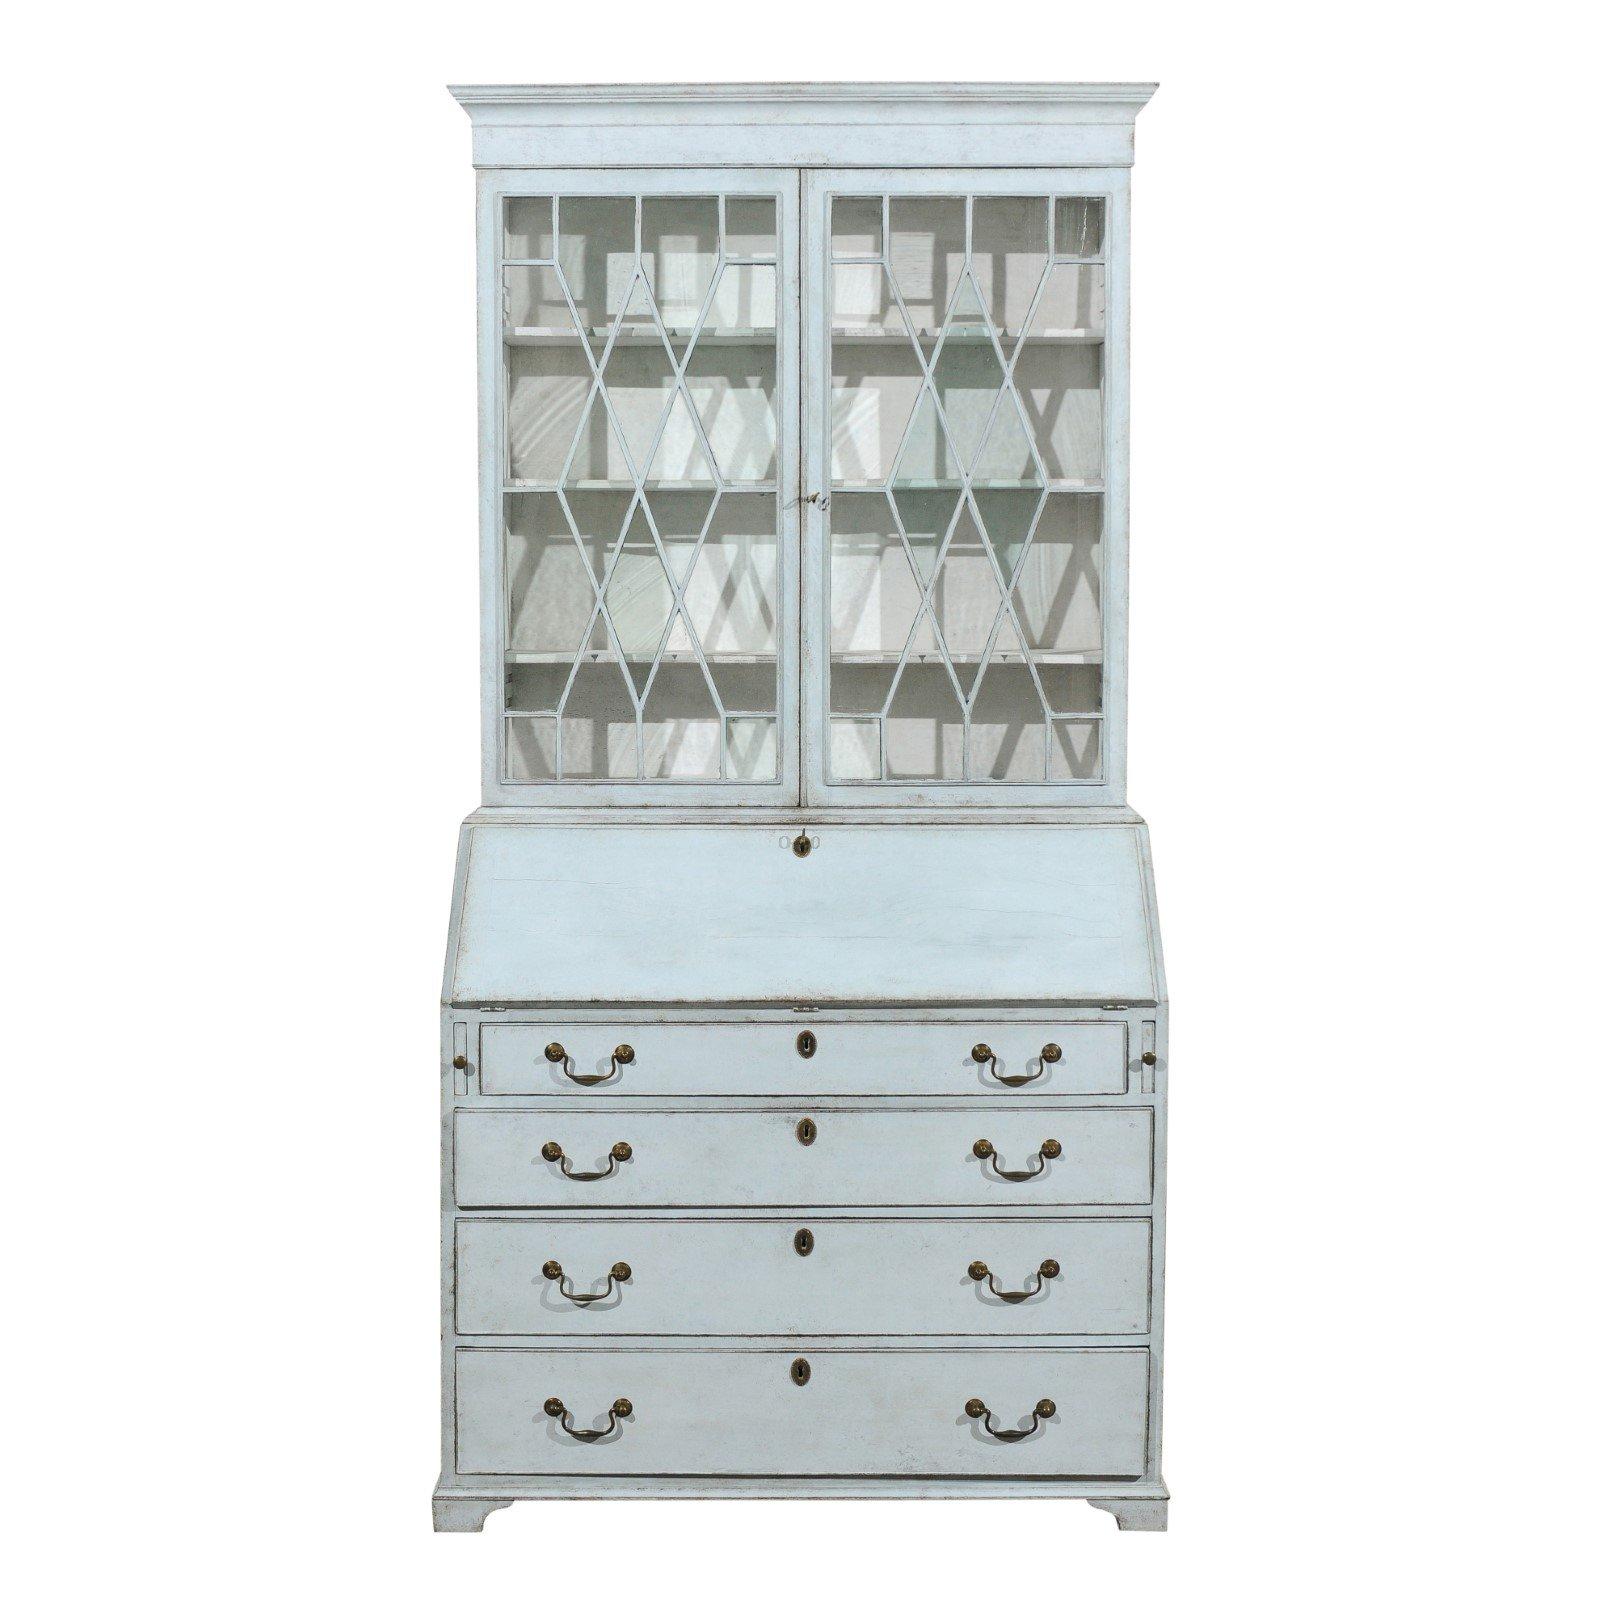 Swedish Gustavian Period Two-Part Painted Secretary with Glass Doors, circa 1790